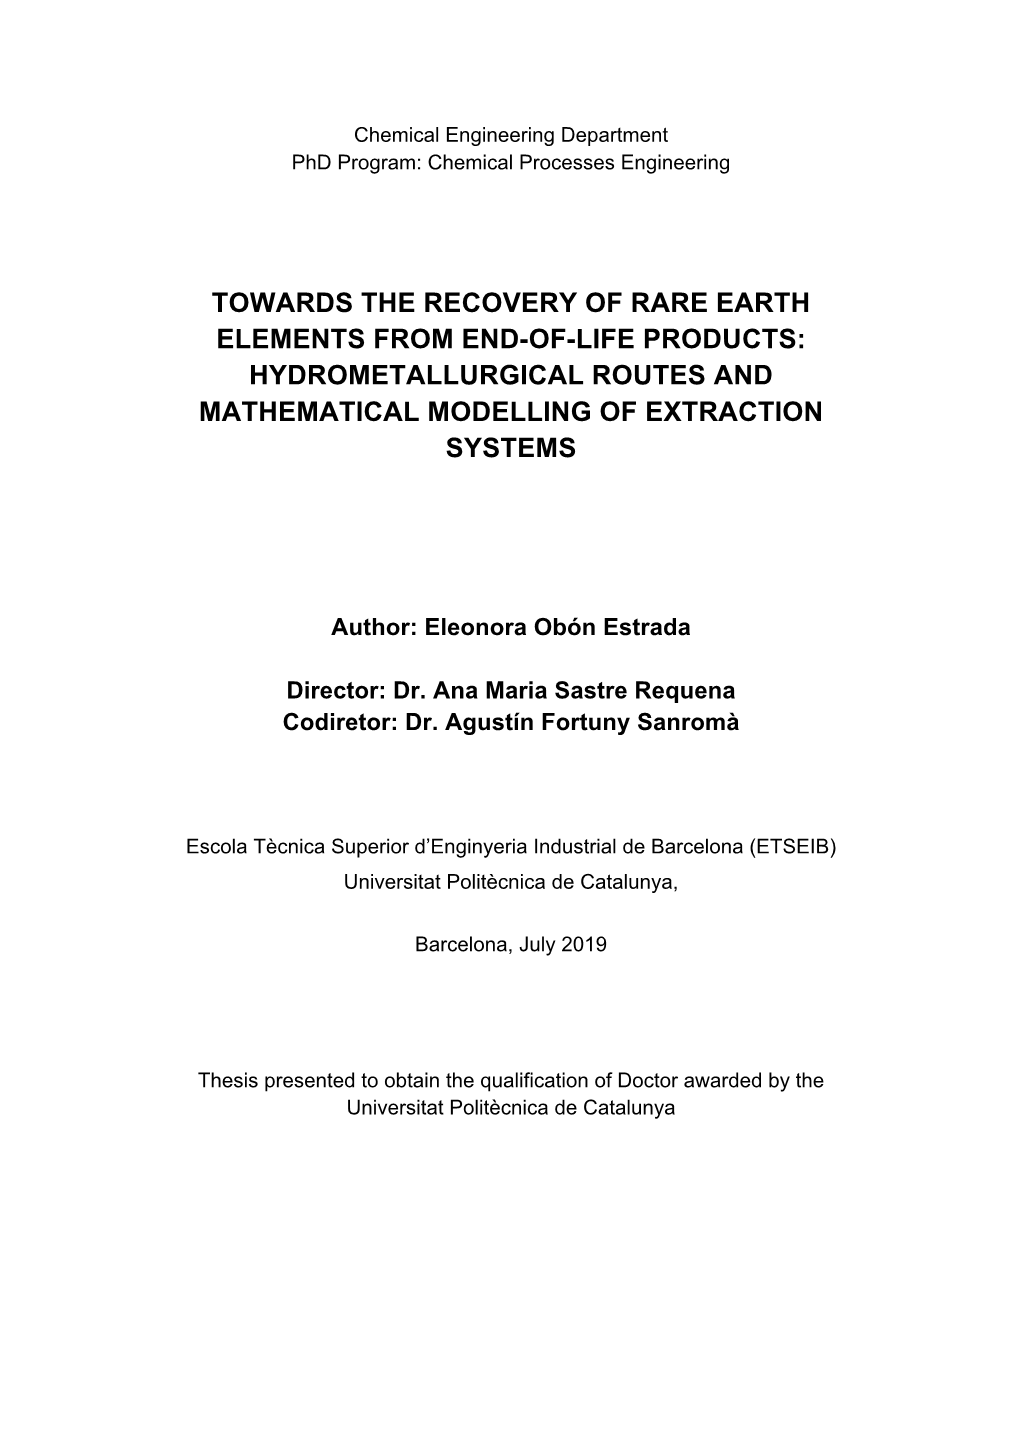 Towards the Recovery of Rare Earth Elements from End-Of-Life Products: Hydrometallurgical Routes and Mathematical Modelling of Extraction Systems